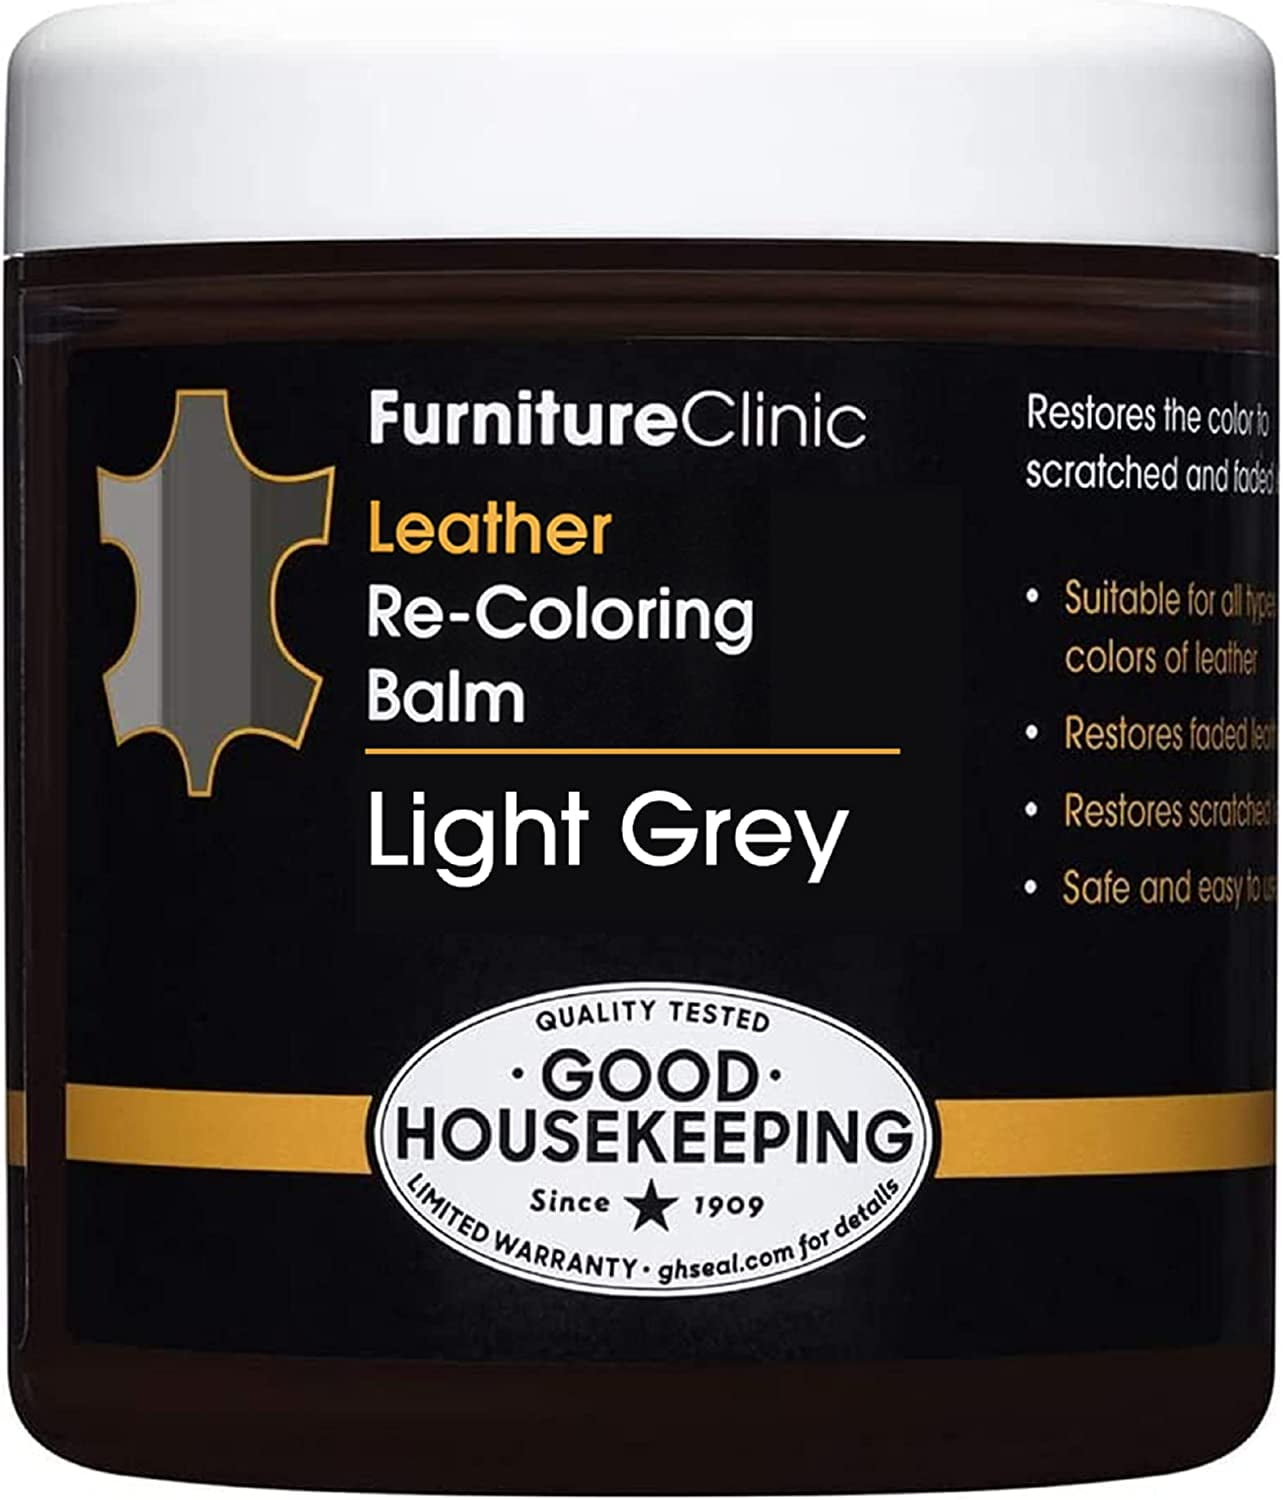  WEYSTOM Leather Recoloring Balm - Dark Gray Leather Repair Kit  for Furniture, Leather Dye, Recolor, Renew, Repair & Restore Aged, Faded,  Cracked, Peeling and Scuffed Leather : Automotive